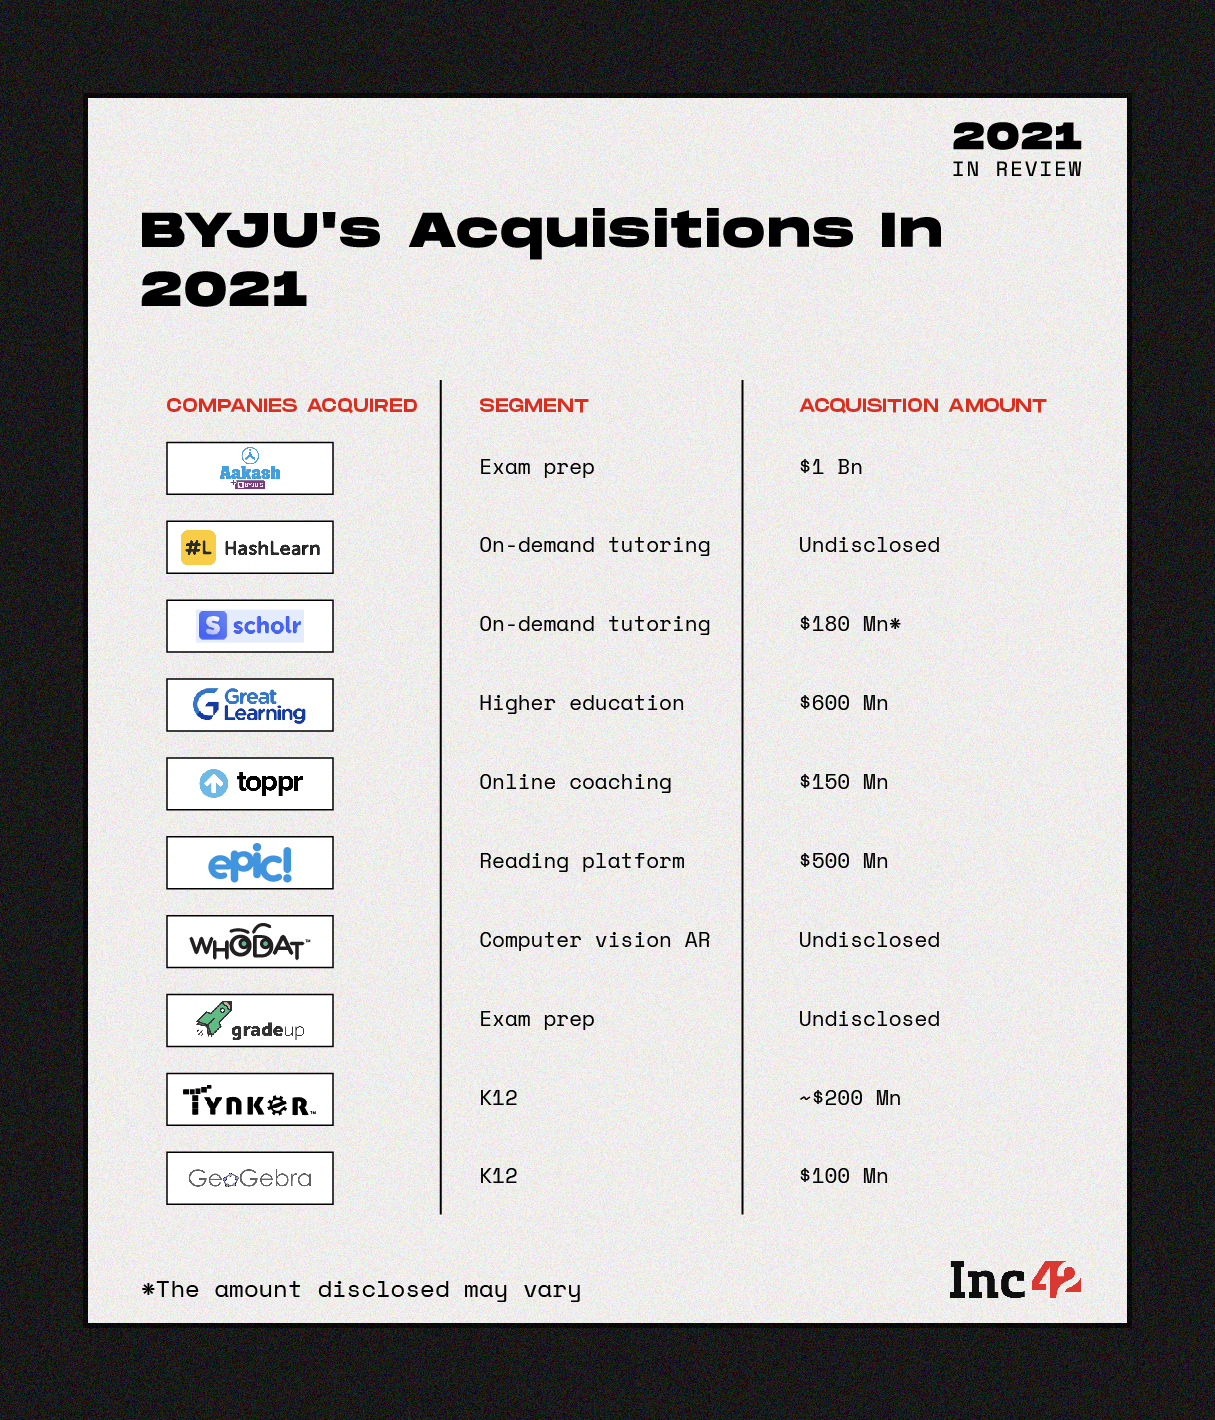 BYJU’s Acquisition Spree Continues Be it funding, scaling, or acquisition– edtech decacorn BYJU’s has been on top of the chain. After acquiring WhiteHat Jr last year for $300 Mn, the IPO-bound startup has acquired a total of 10 edtech startups for over $2.5 Bn, with more under its sleeves. One of the major acquisitions of BYJU’s this year was traditional offline coaching centre Aakash Educational Services for over a $1 Bn. The edtech giant has also grabbed US-based EPIC and Tynker, and most recently Austria’s GeoGebra in a bid to capture international markets. {{Add BYJUs acquisition table}} Following The Lead: Unacademy Closing the gap in terms of subscription count with BYJU’s, Bengaluru-based Unacademy has also acquired four edtech startups-TapChief, Handa Ka Funda, Rheo TV and the latest being Swiflearn to scale its operations. The startup which entered the unicorn club in September last year after picking $150 Mn, is now valued more than $3.44 Bn, making it the second highest valued edtech startup. Good Glamm Group: Strengthening the content to commerce flywheel The beauty ecommerce platform MyGlamm’s parent not just achieved the unicorn club status this year, but also positioned itself as a house of brands following the content-to-commerce model. The company with its acquisition of ScoopWhoop, MissMalini, and POPxo has strengthened its grip on the content commerce market, whereas with acquisition of MomsCo and BabyChakra it has expanded its product portfolio. Well that's all folks, wait up for our annual funding report for more insights on how M&A changed in this year.